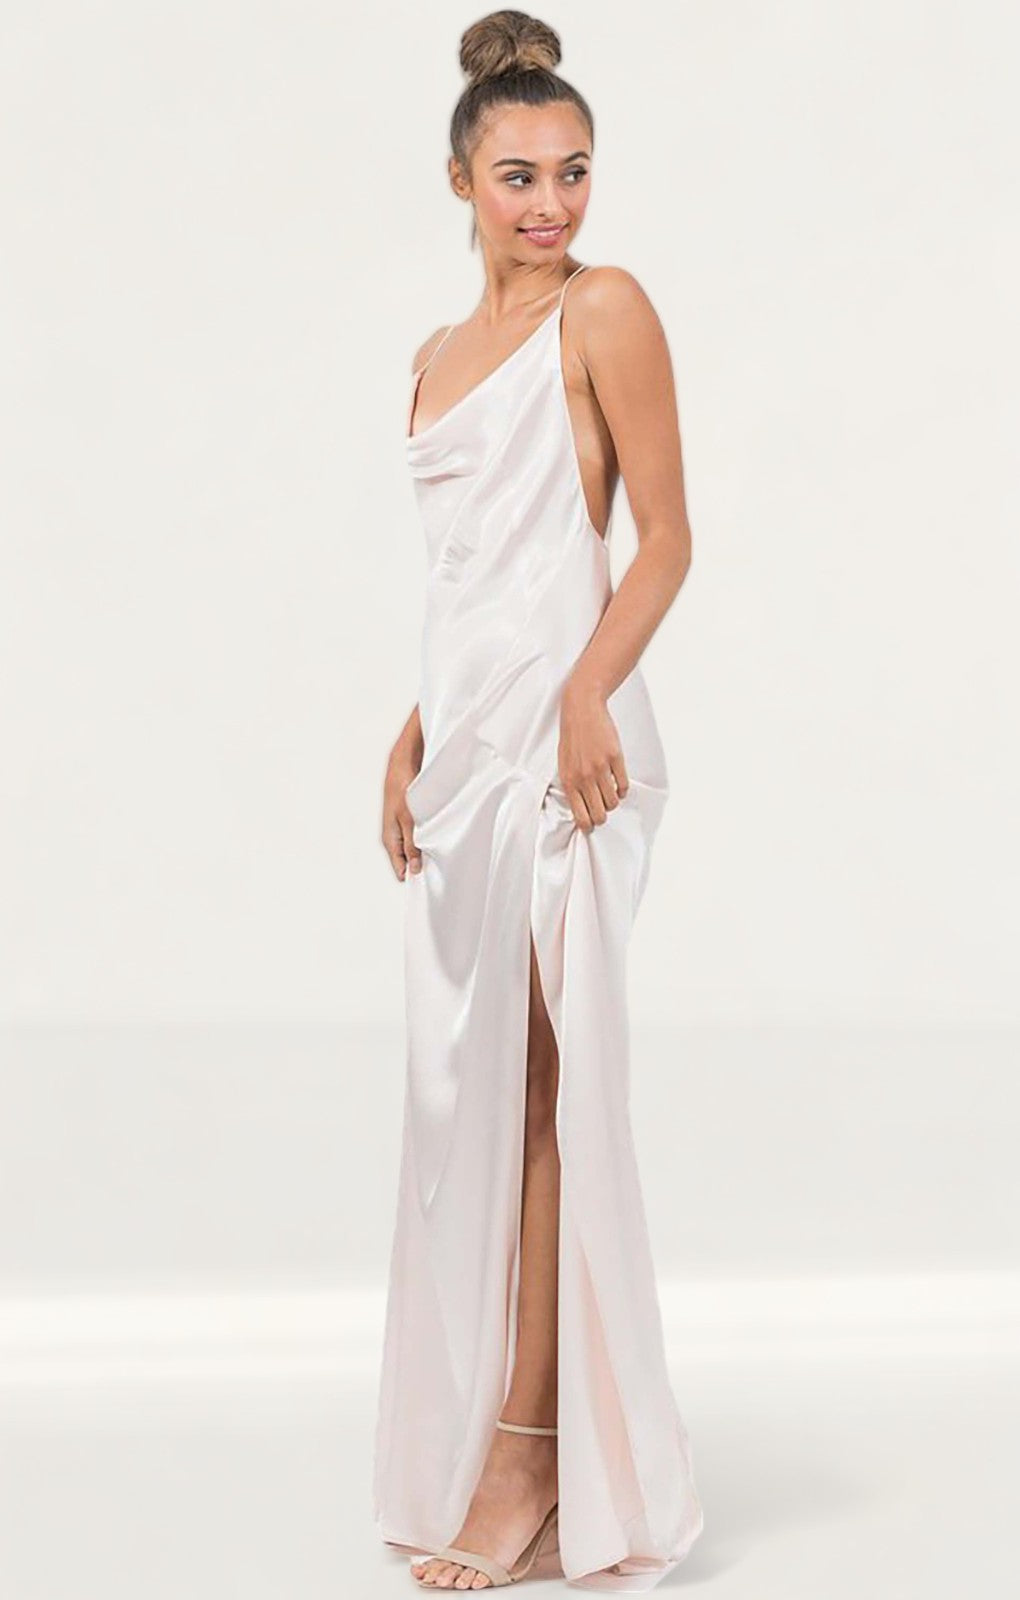 One Fell Swoop Spenser Maxi in Peony product image